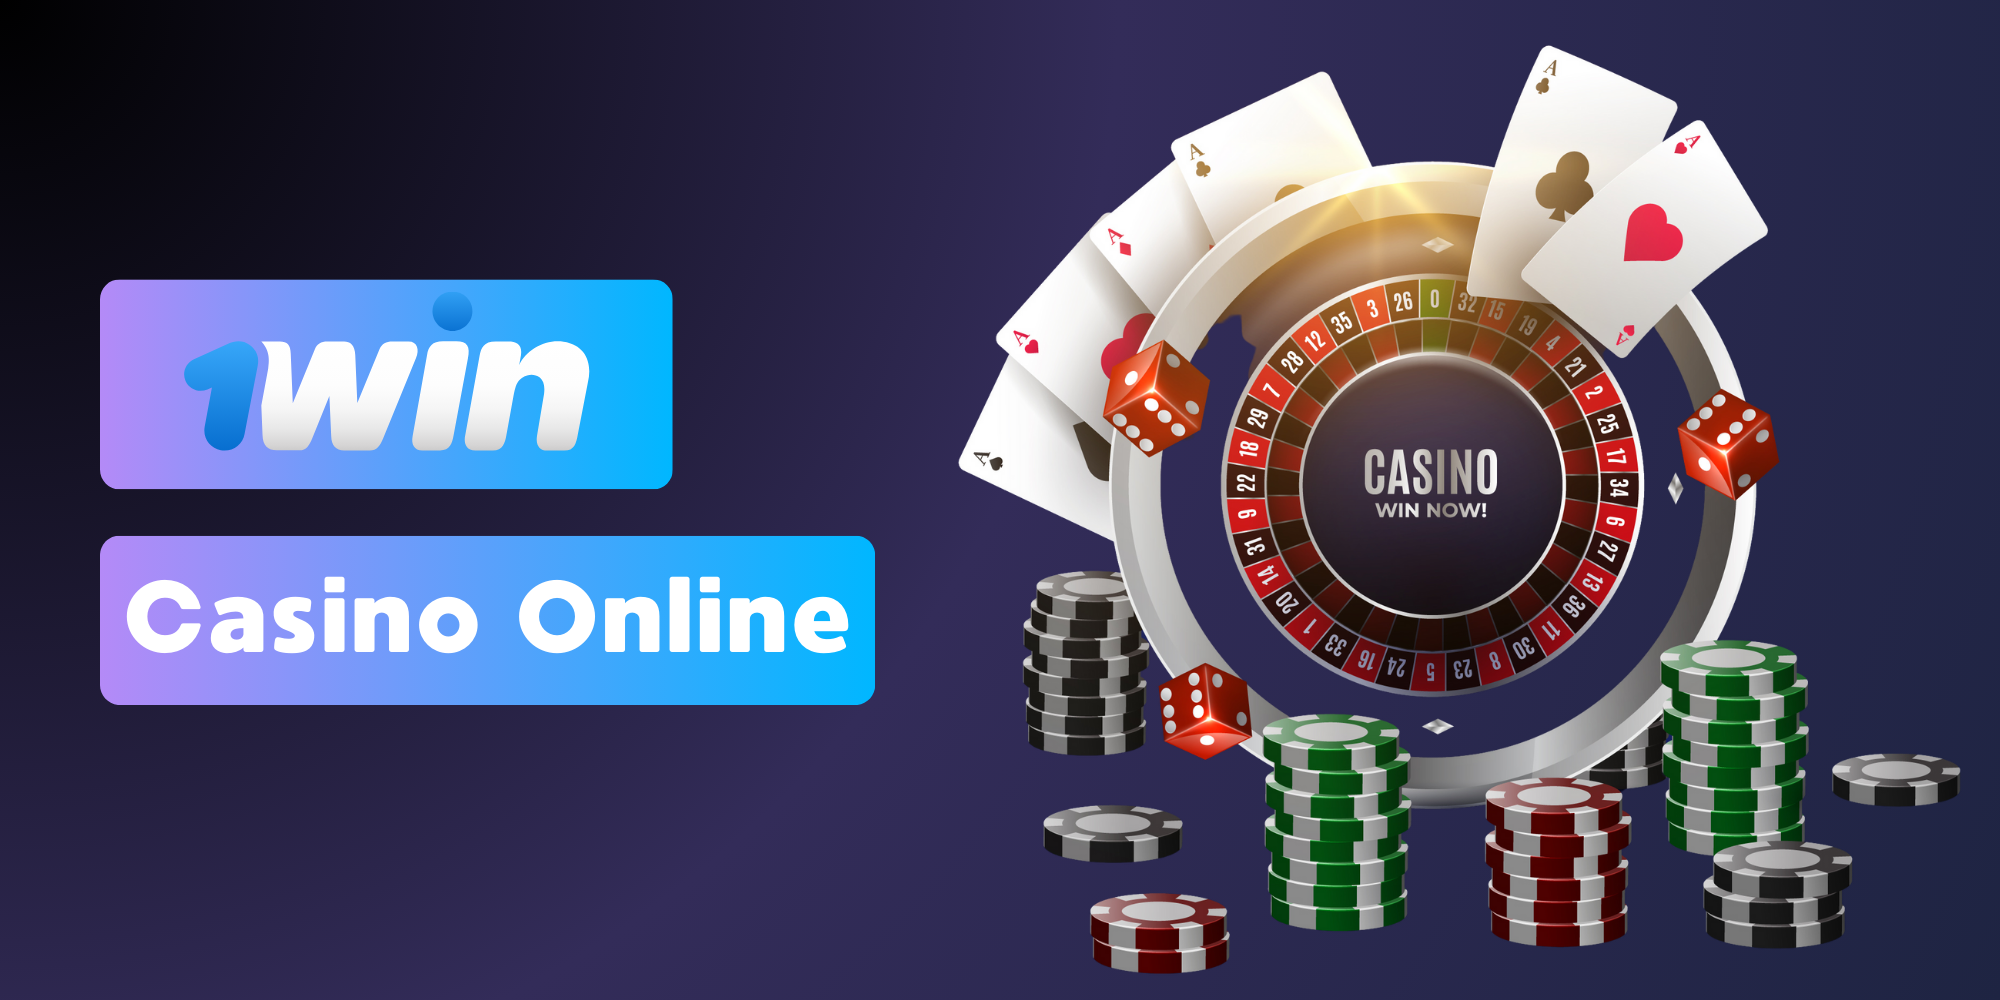 With more than 12,000 games, 1win casino boasts an outstanding gaming variety